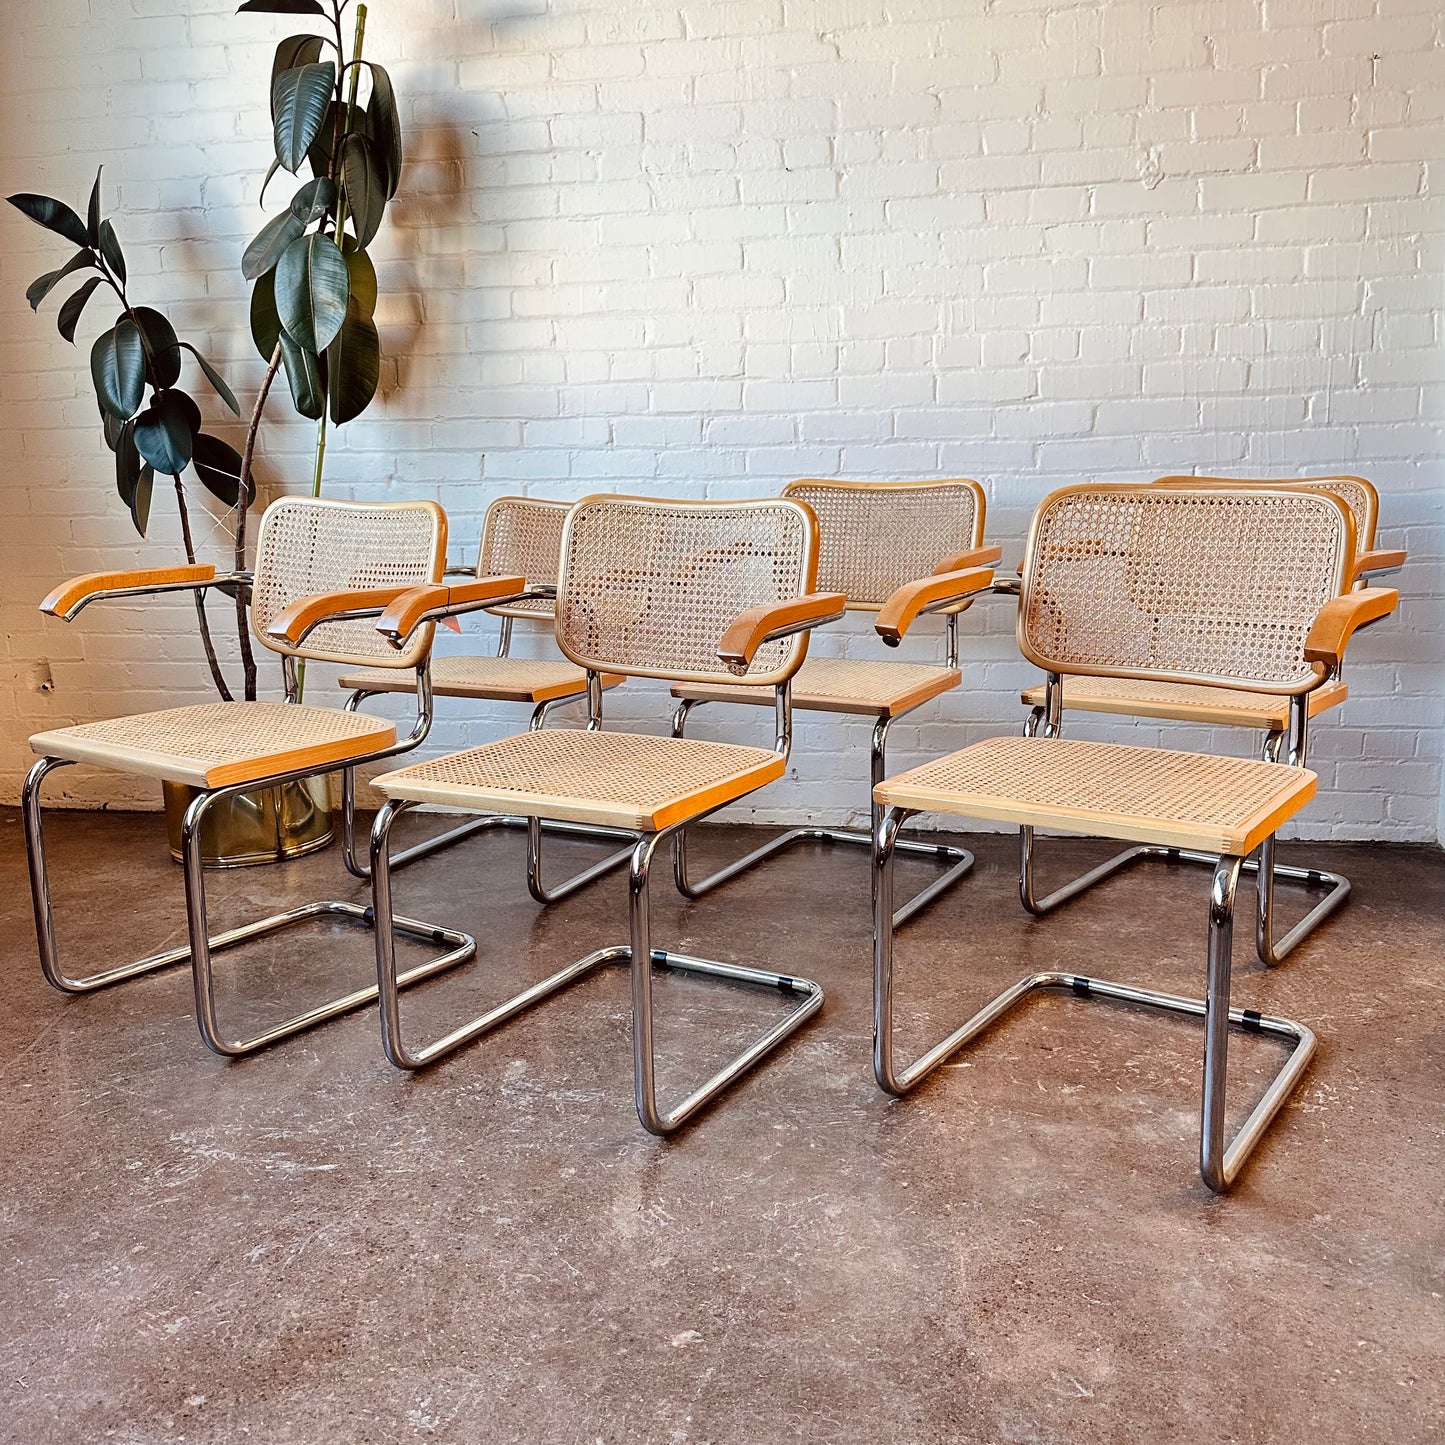 SET OF 6 MARCEL BREUER CESCA CANED ARM CHAIRS, MADE IN ITALY